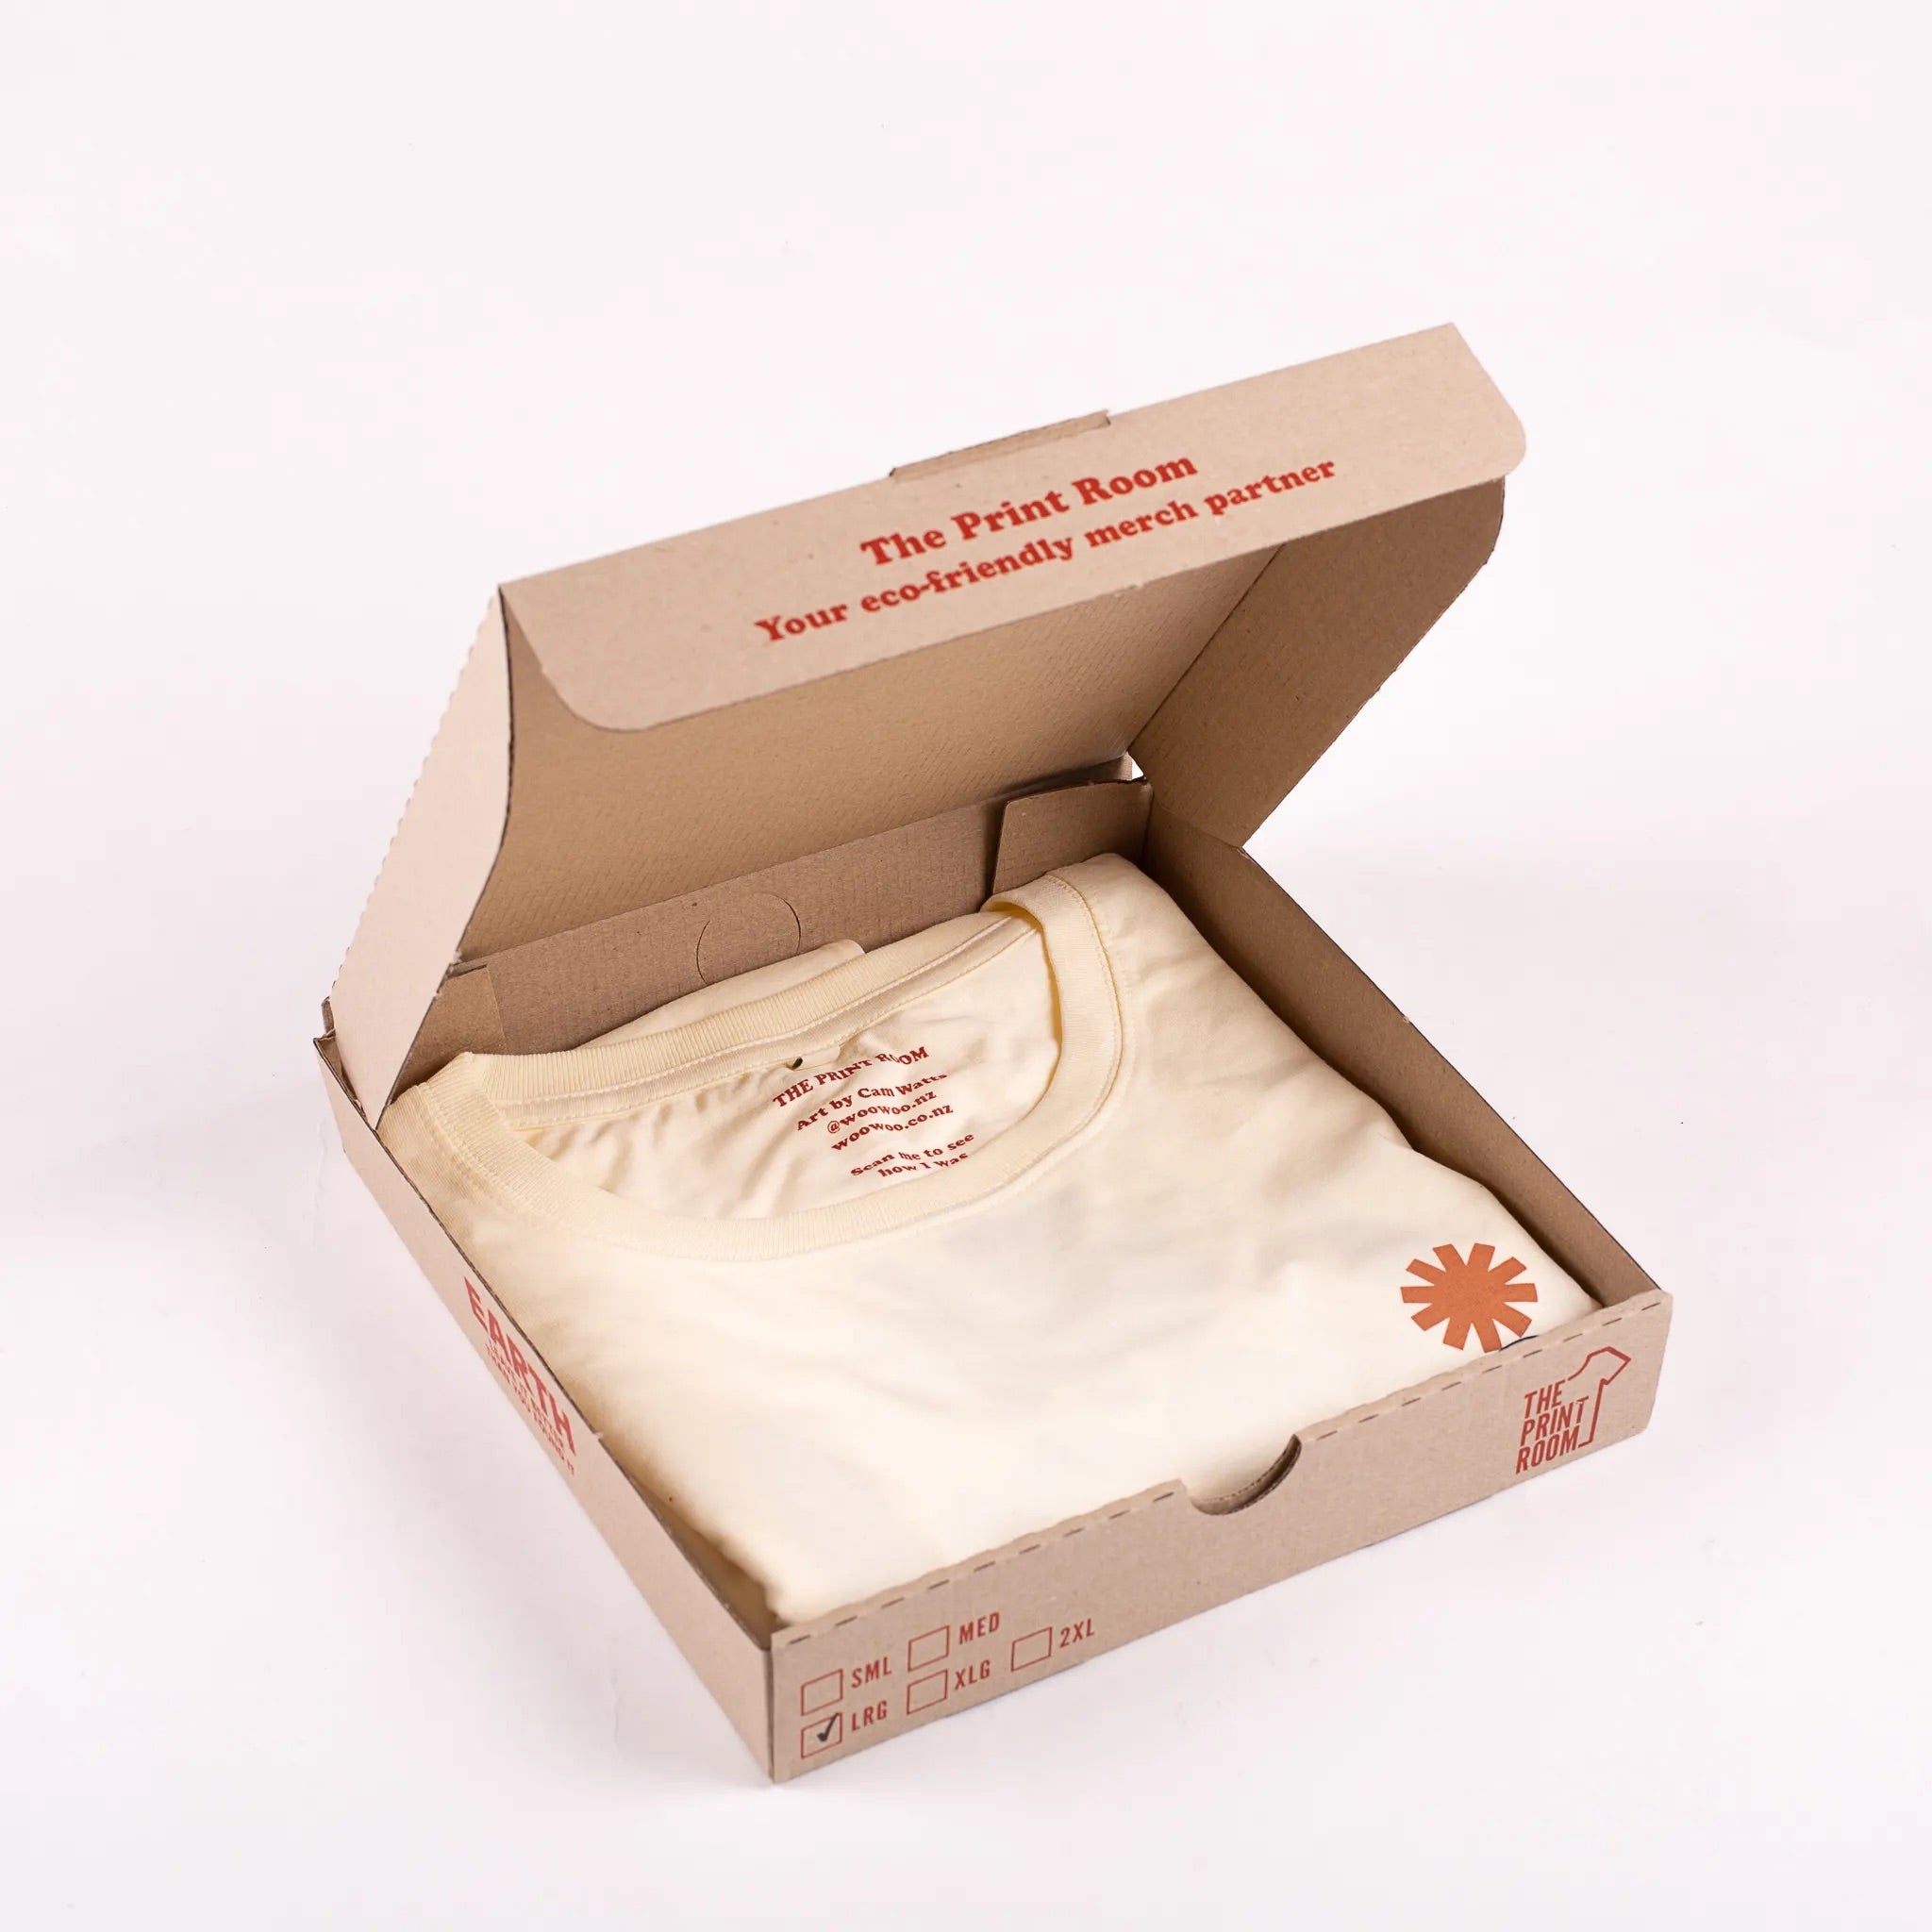 environmentally friendly compostable and custom made packaging options